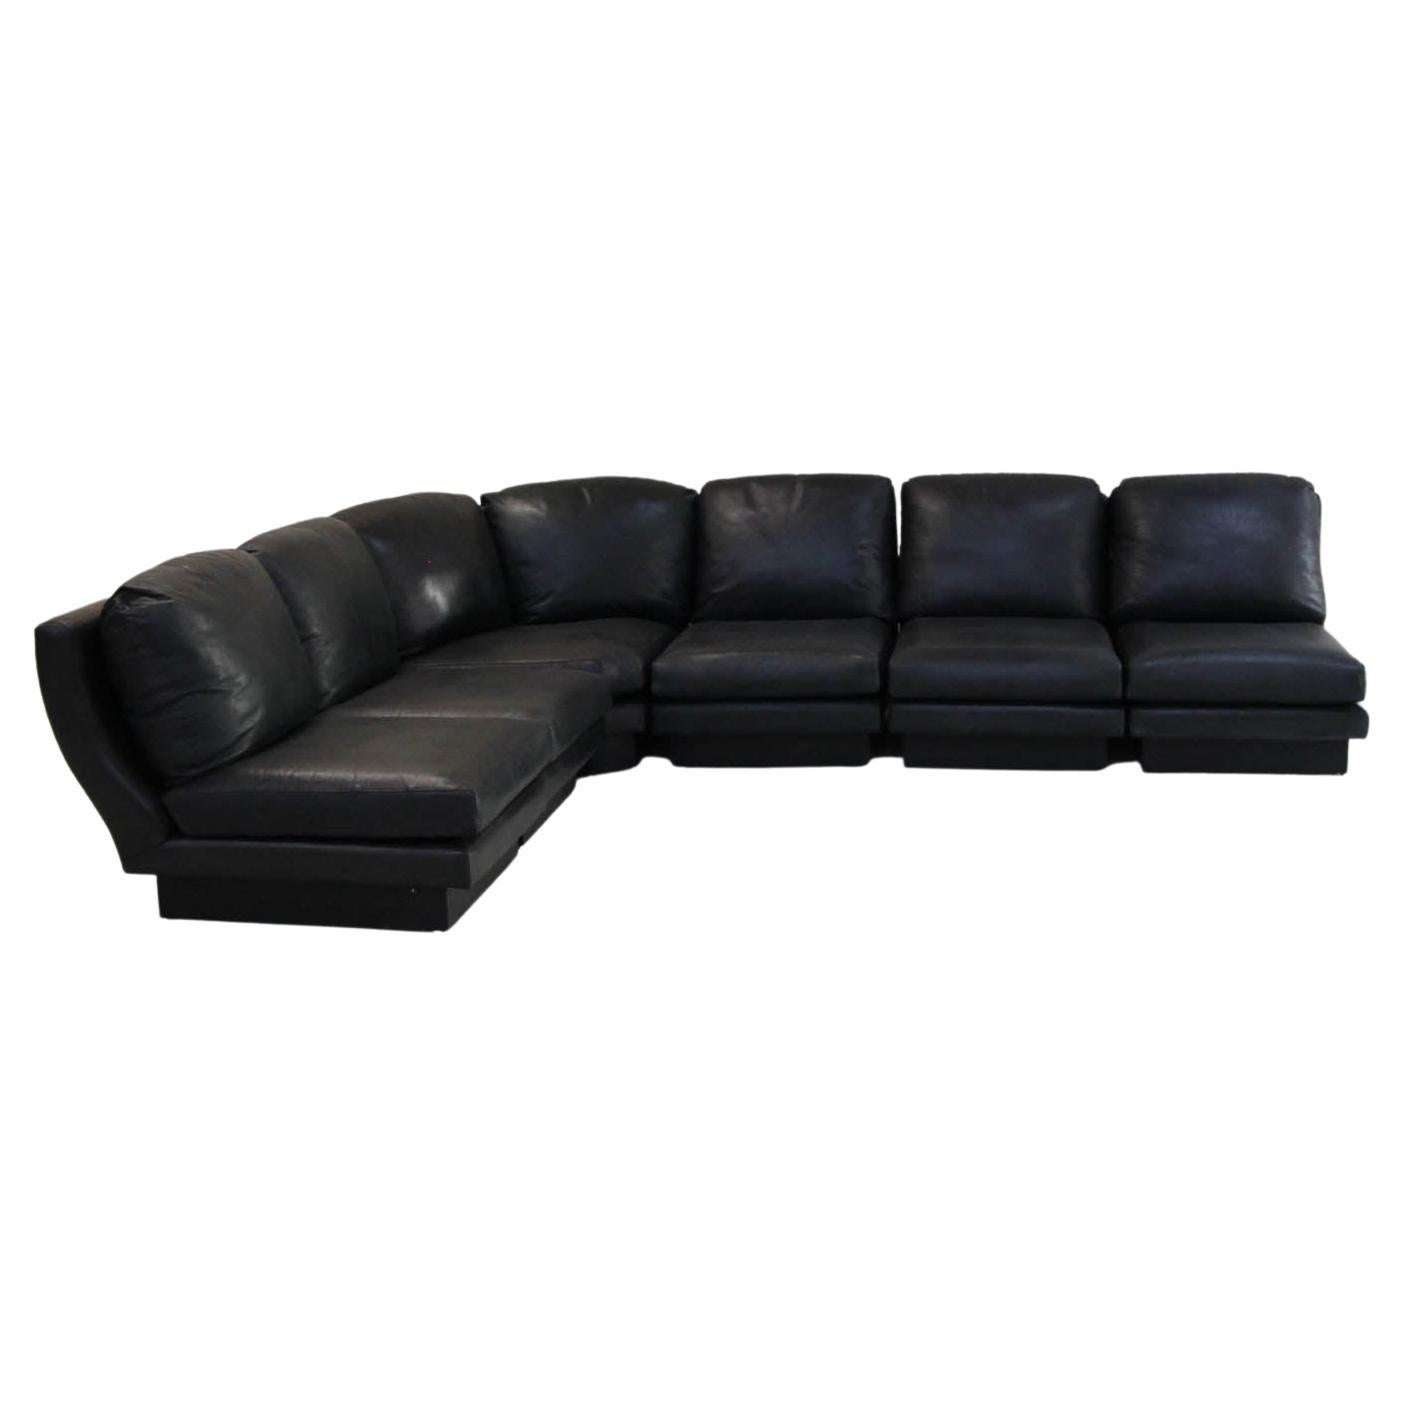 Rare Vintage Sofa in Black Leather and Laminated Signed Willy Rizzo